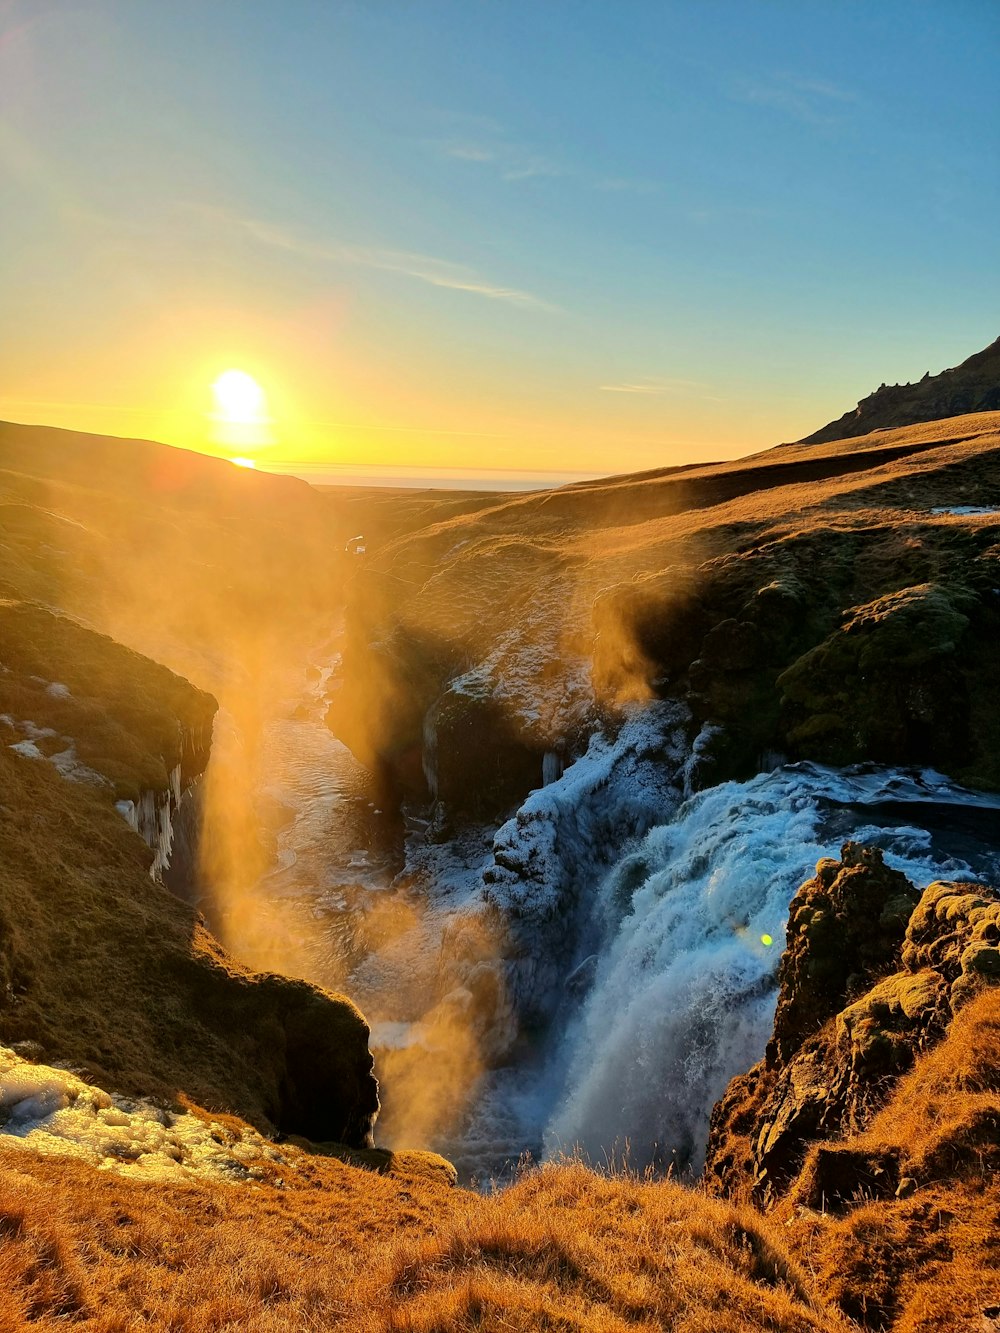 the sun is setting over a waterfall in the mountains